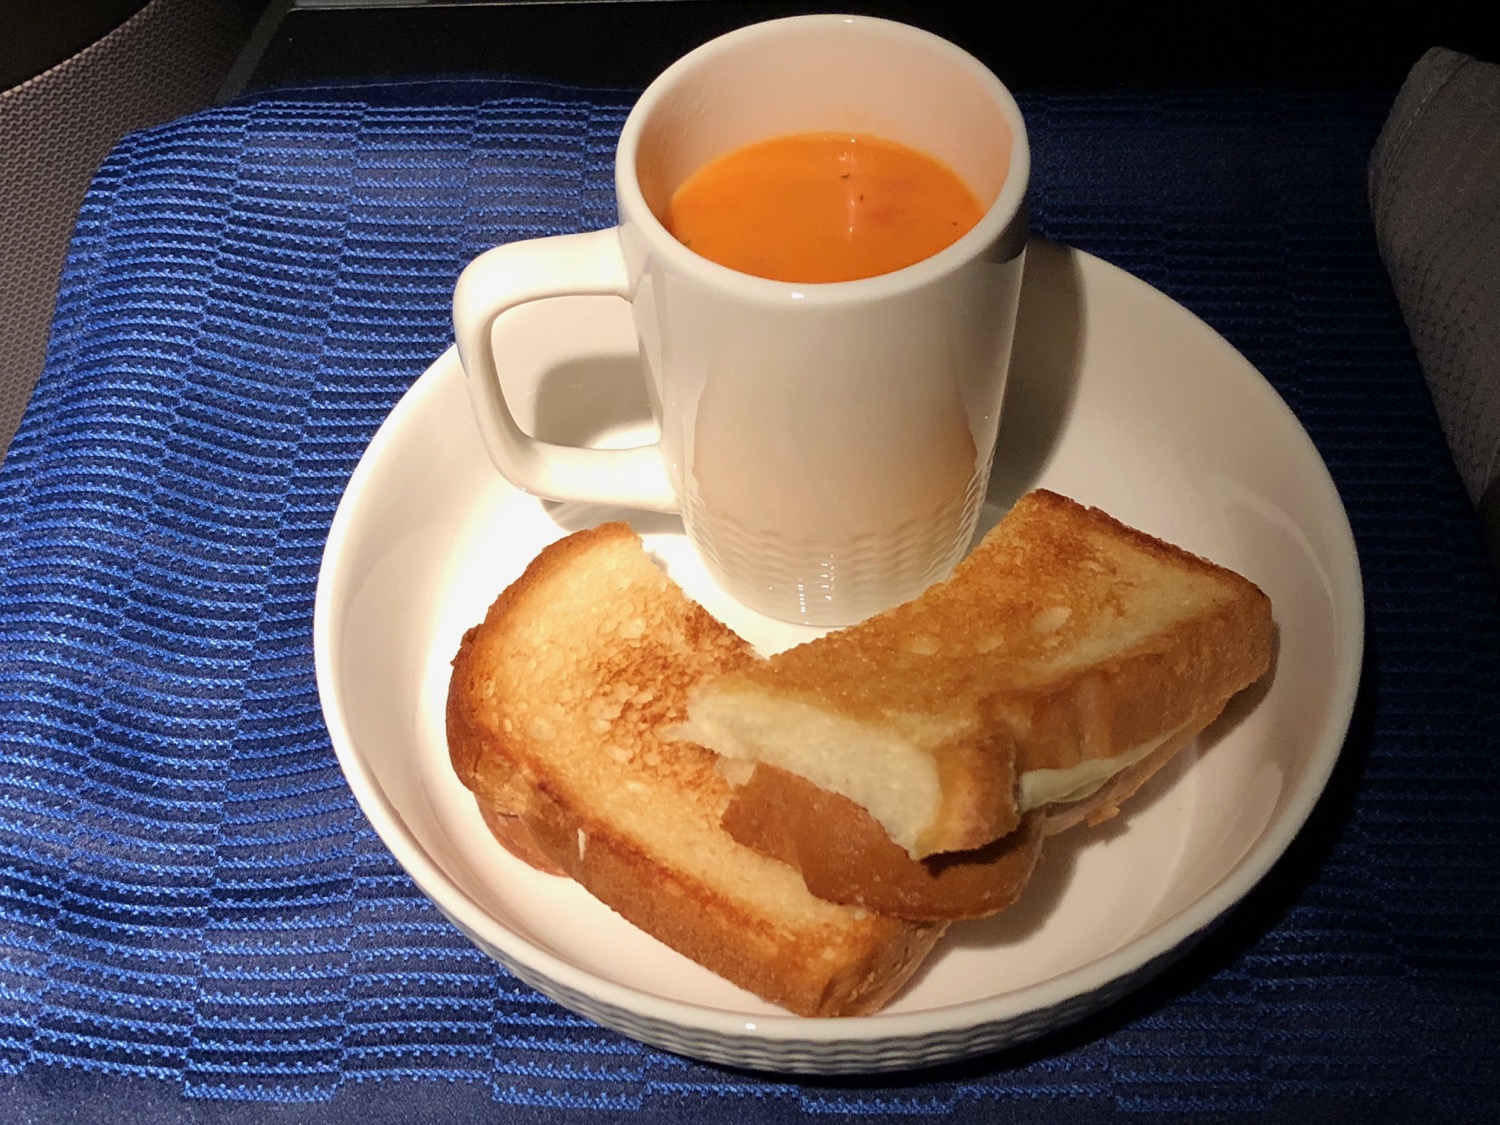 a plate of food and a cup of soup